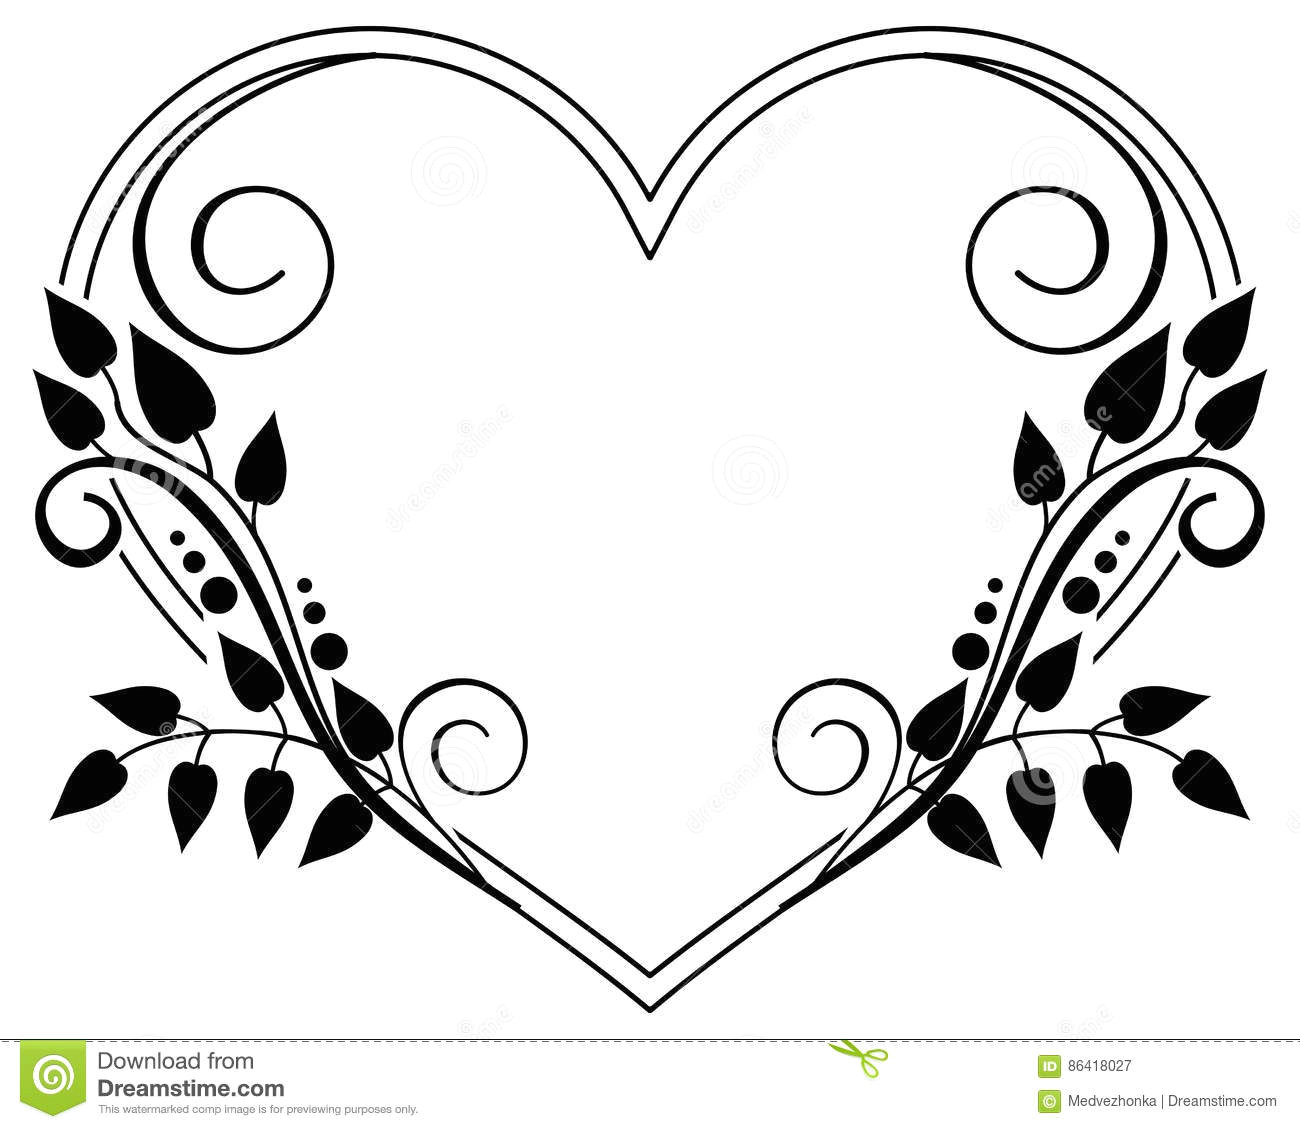 Drawings Of Flowers and Hearts In Black and White Heart Shaped Black and White Frame with Floral Silhouettes Raster